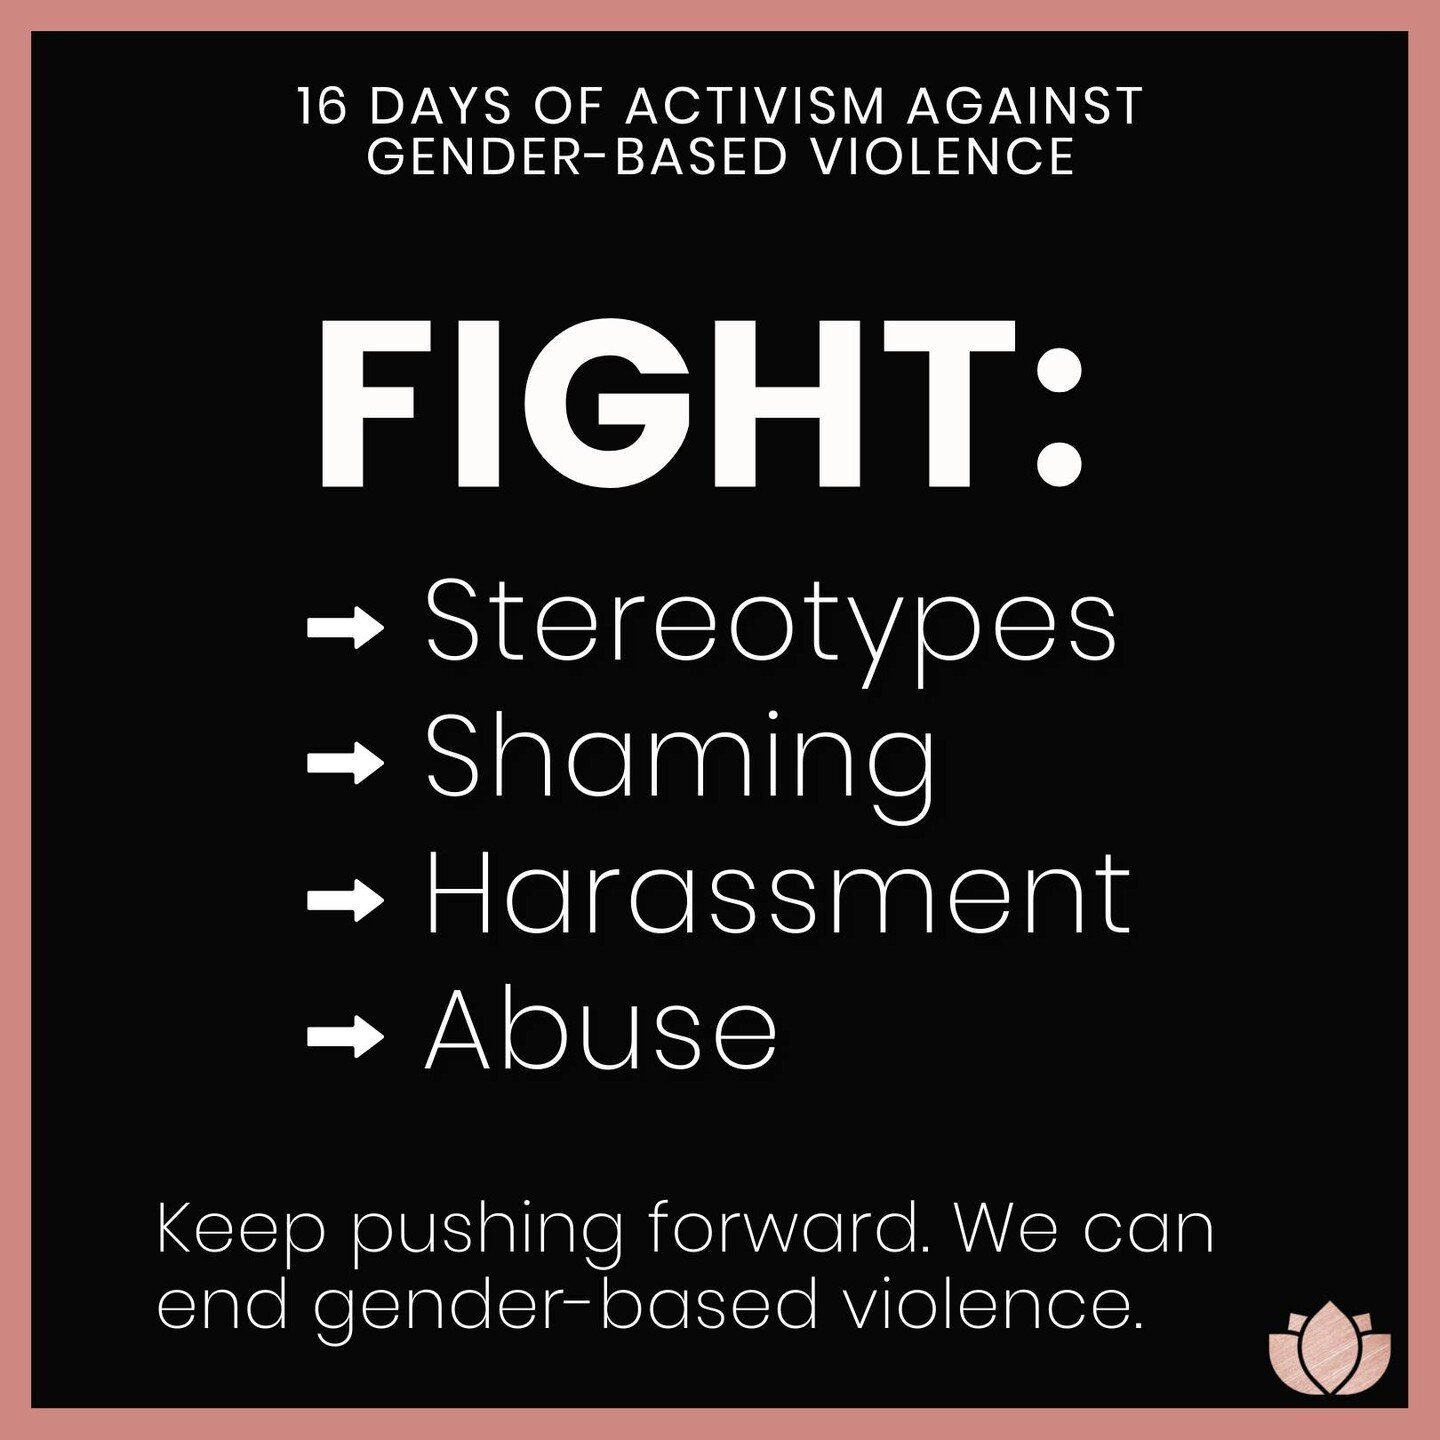 Violence against women and girls remains the most prevalent human rights violation worldwide&mdash;but together, we can work to end it. ⁠
⁠
Don't give up. Don't stay silent. Call it out, Speak out. Stand up. Push forward. ⁠
⁠
Everyone has a role in e